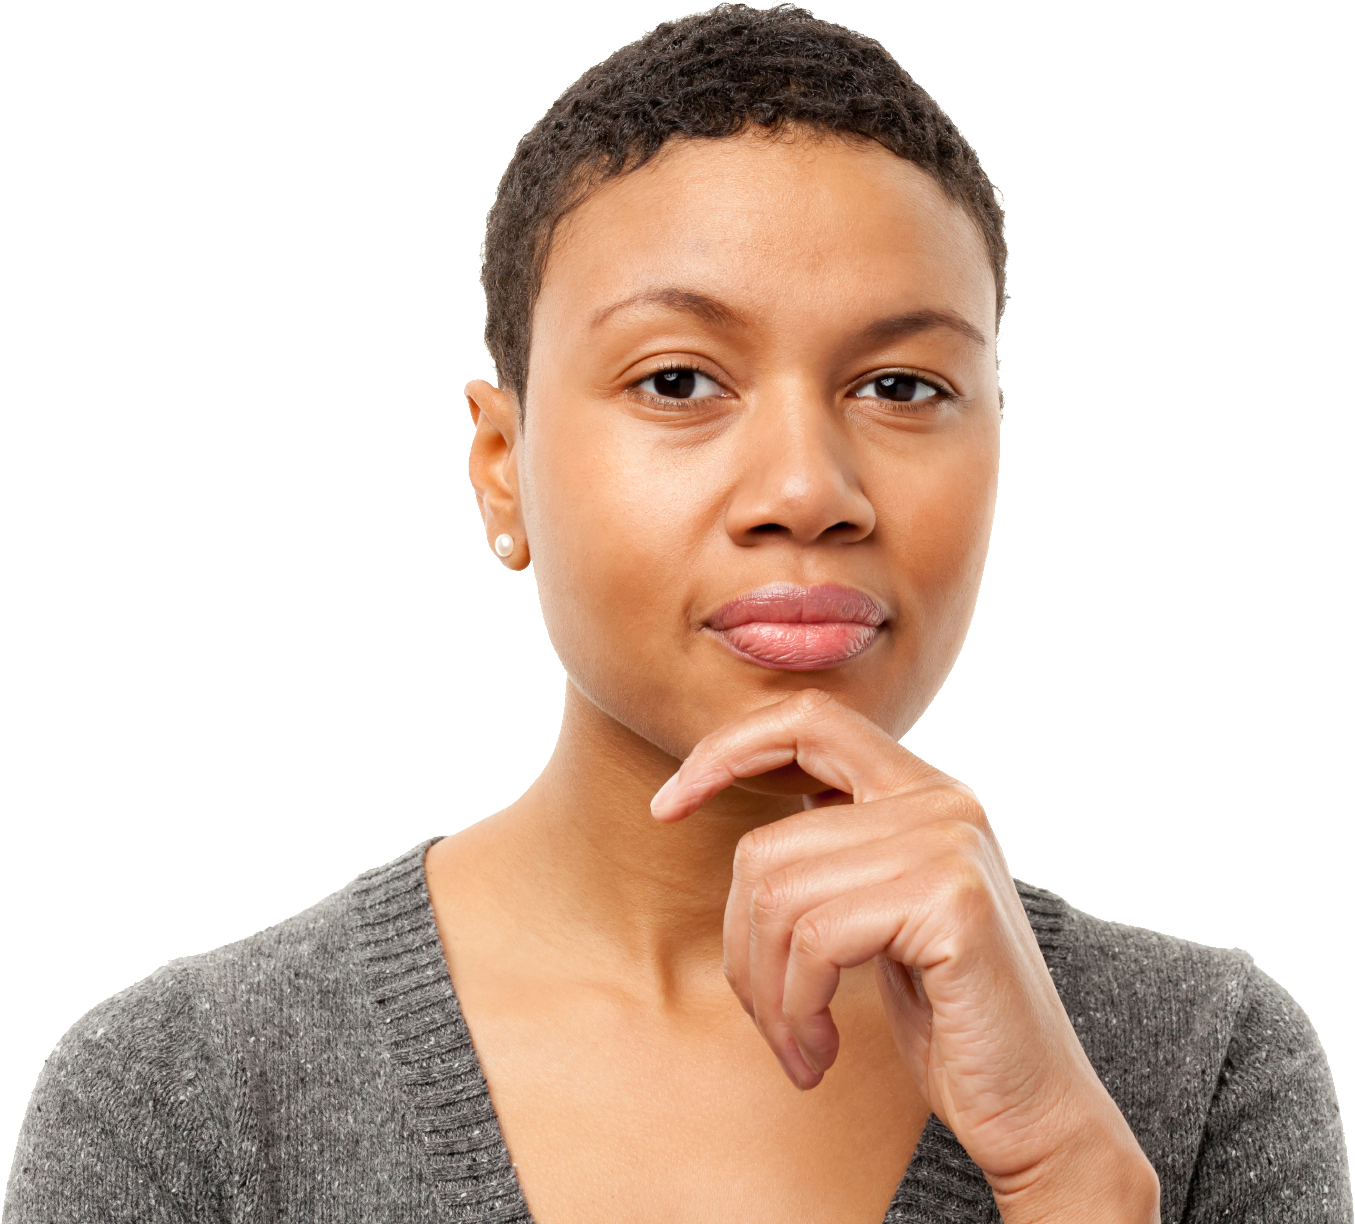 Download PNG image - Thinking Woman PNG Transparent Image 